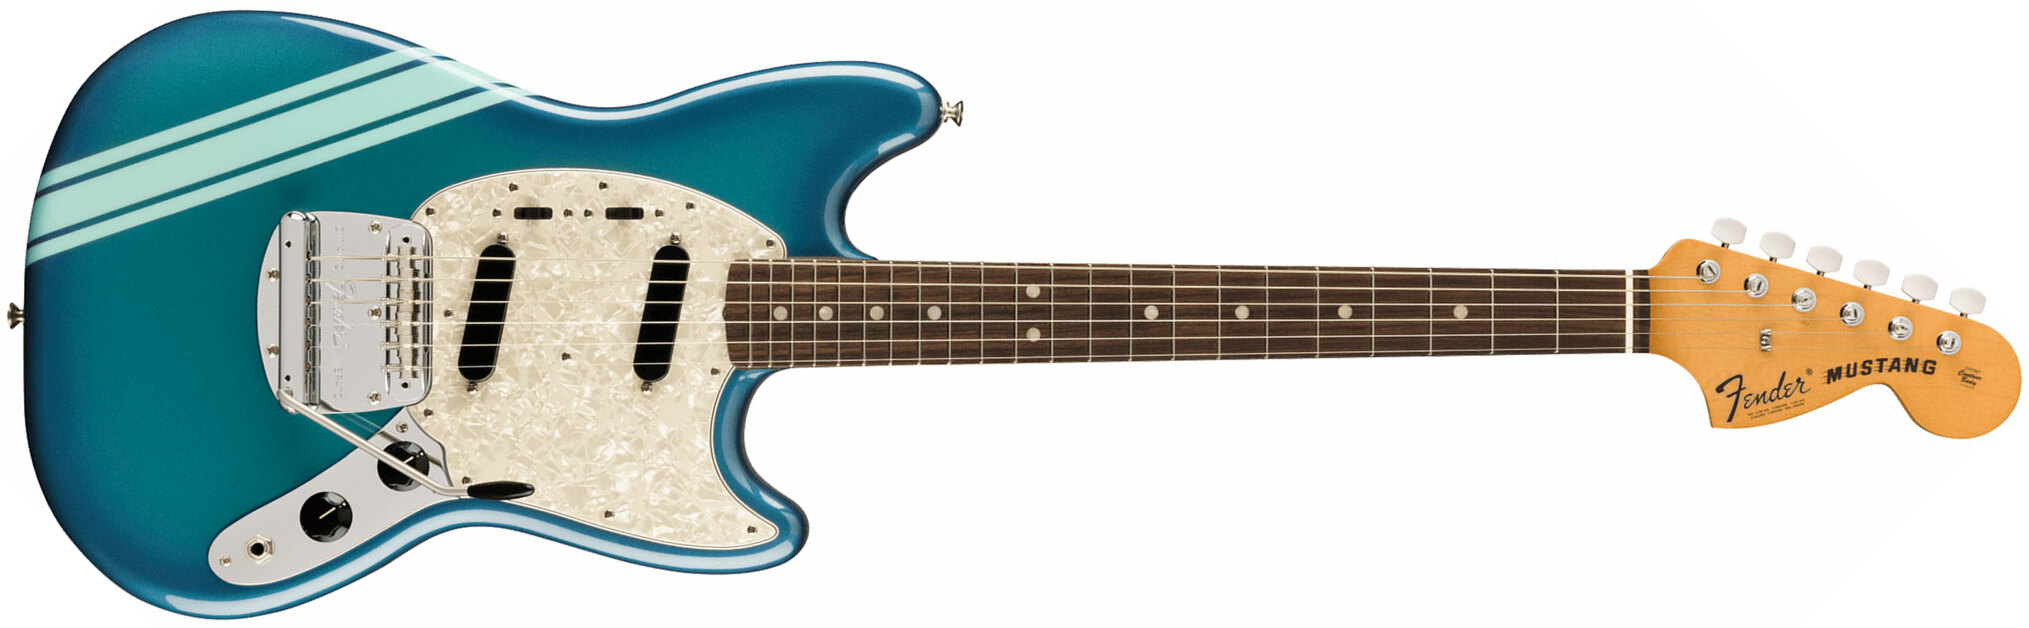 Fender Mustang 70s Competition Vintera 2 Mex 2s Trem Rw - Competition Blue - Retro rock electric guitar - Main picture